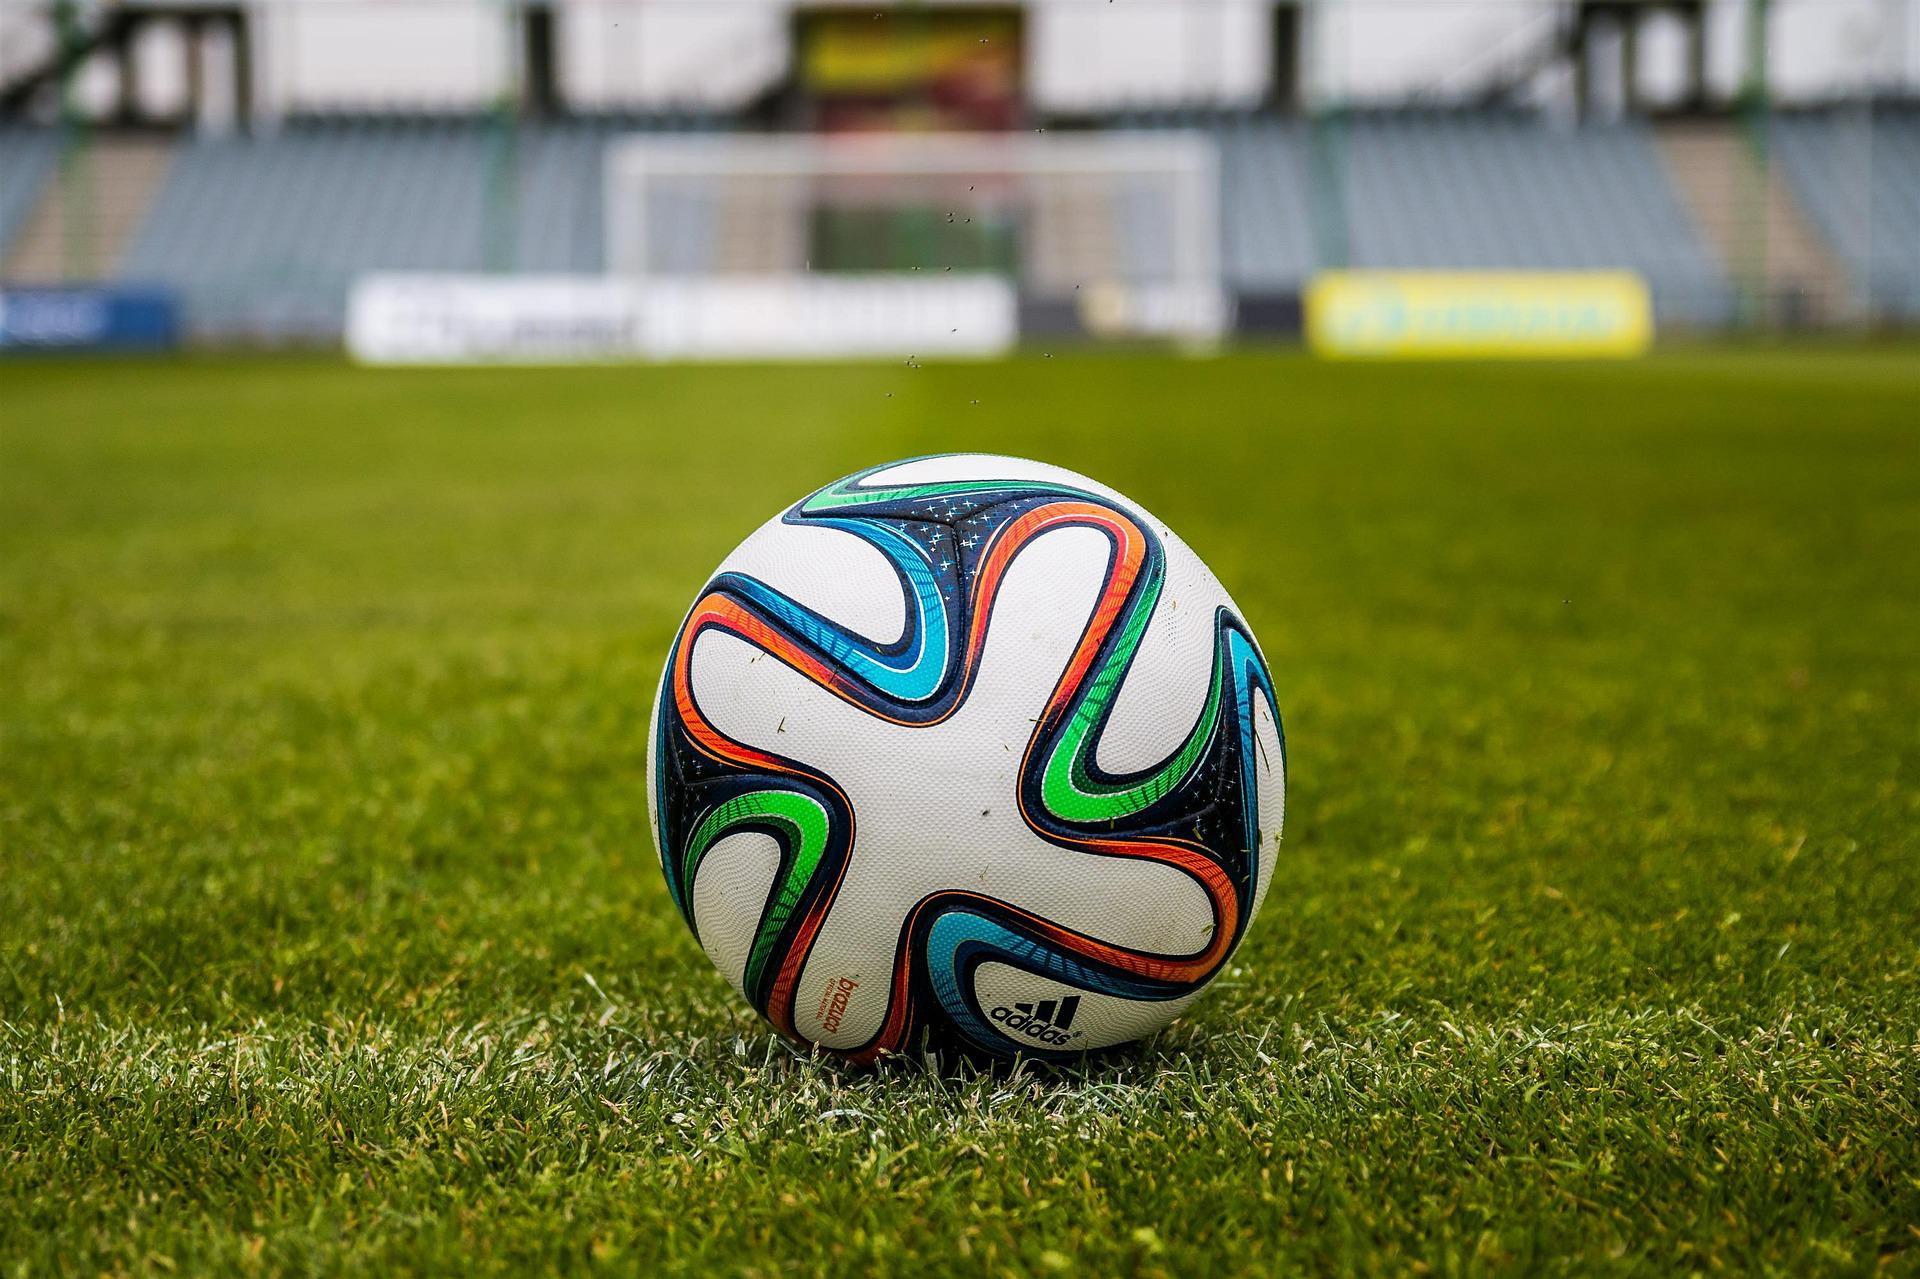 A white and patterned football on a grass pitch